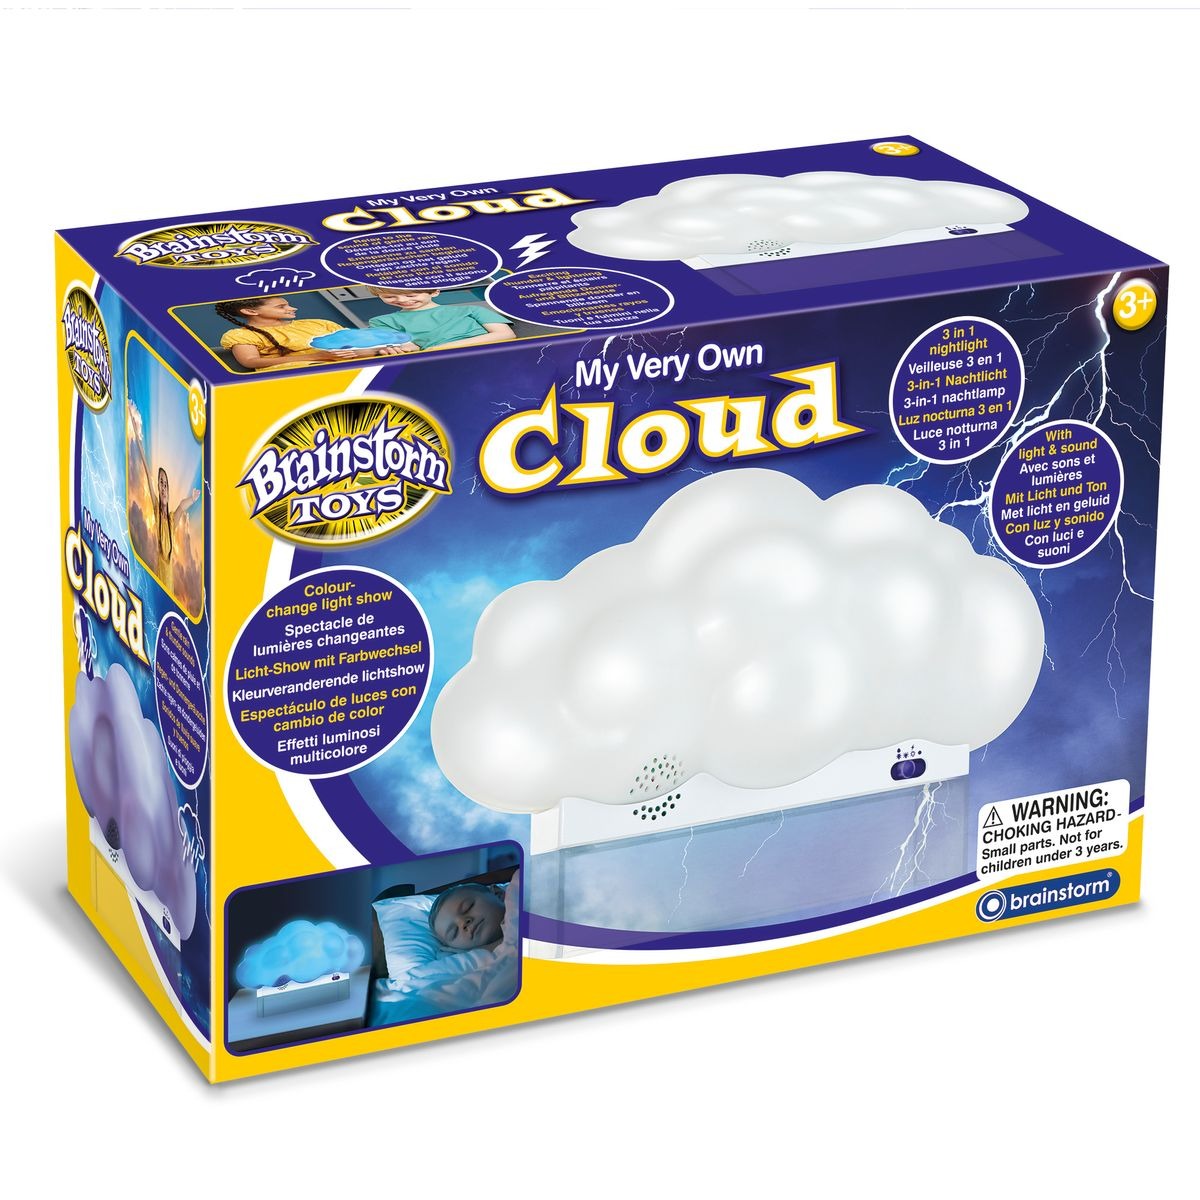 My Very Own Cloud, Experience this beautiful cloud in your own room, in the dark the cloud appears to float as it is set on a clear stand. The first mode allows you to relax to the sound of gentle rain with a calming colour changing LED light, the second mode is the colour change only, with no sound, and the third mode brings the force of nature into your room with thrilling thunder sounds and lightning effects. Suitable for kids from 3+ years, it makes the perfect bedtime lamp as each mode switches off aut